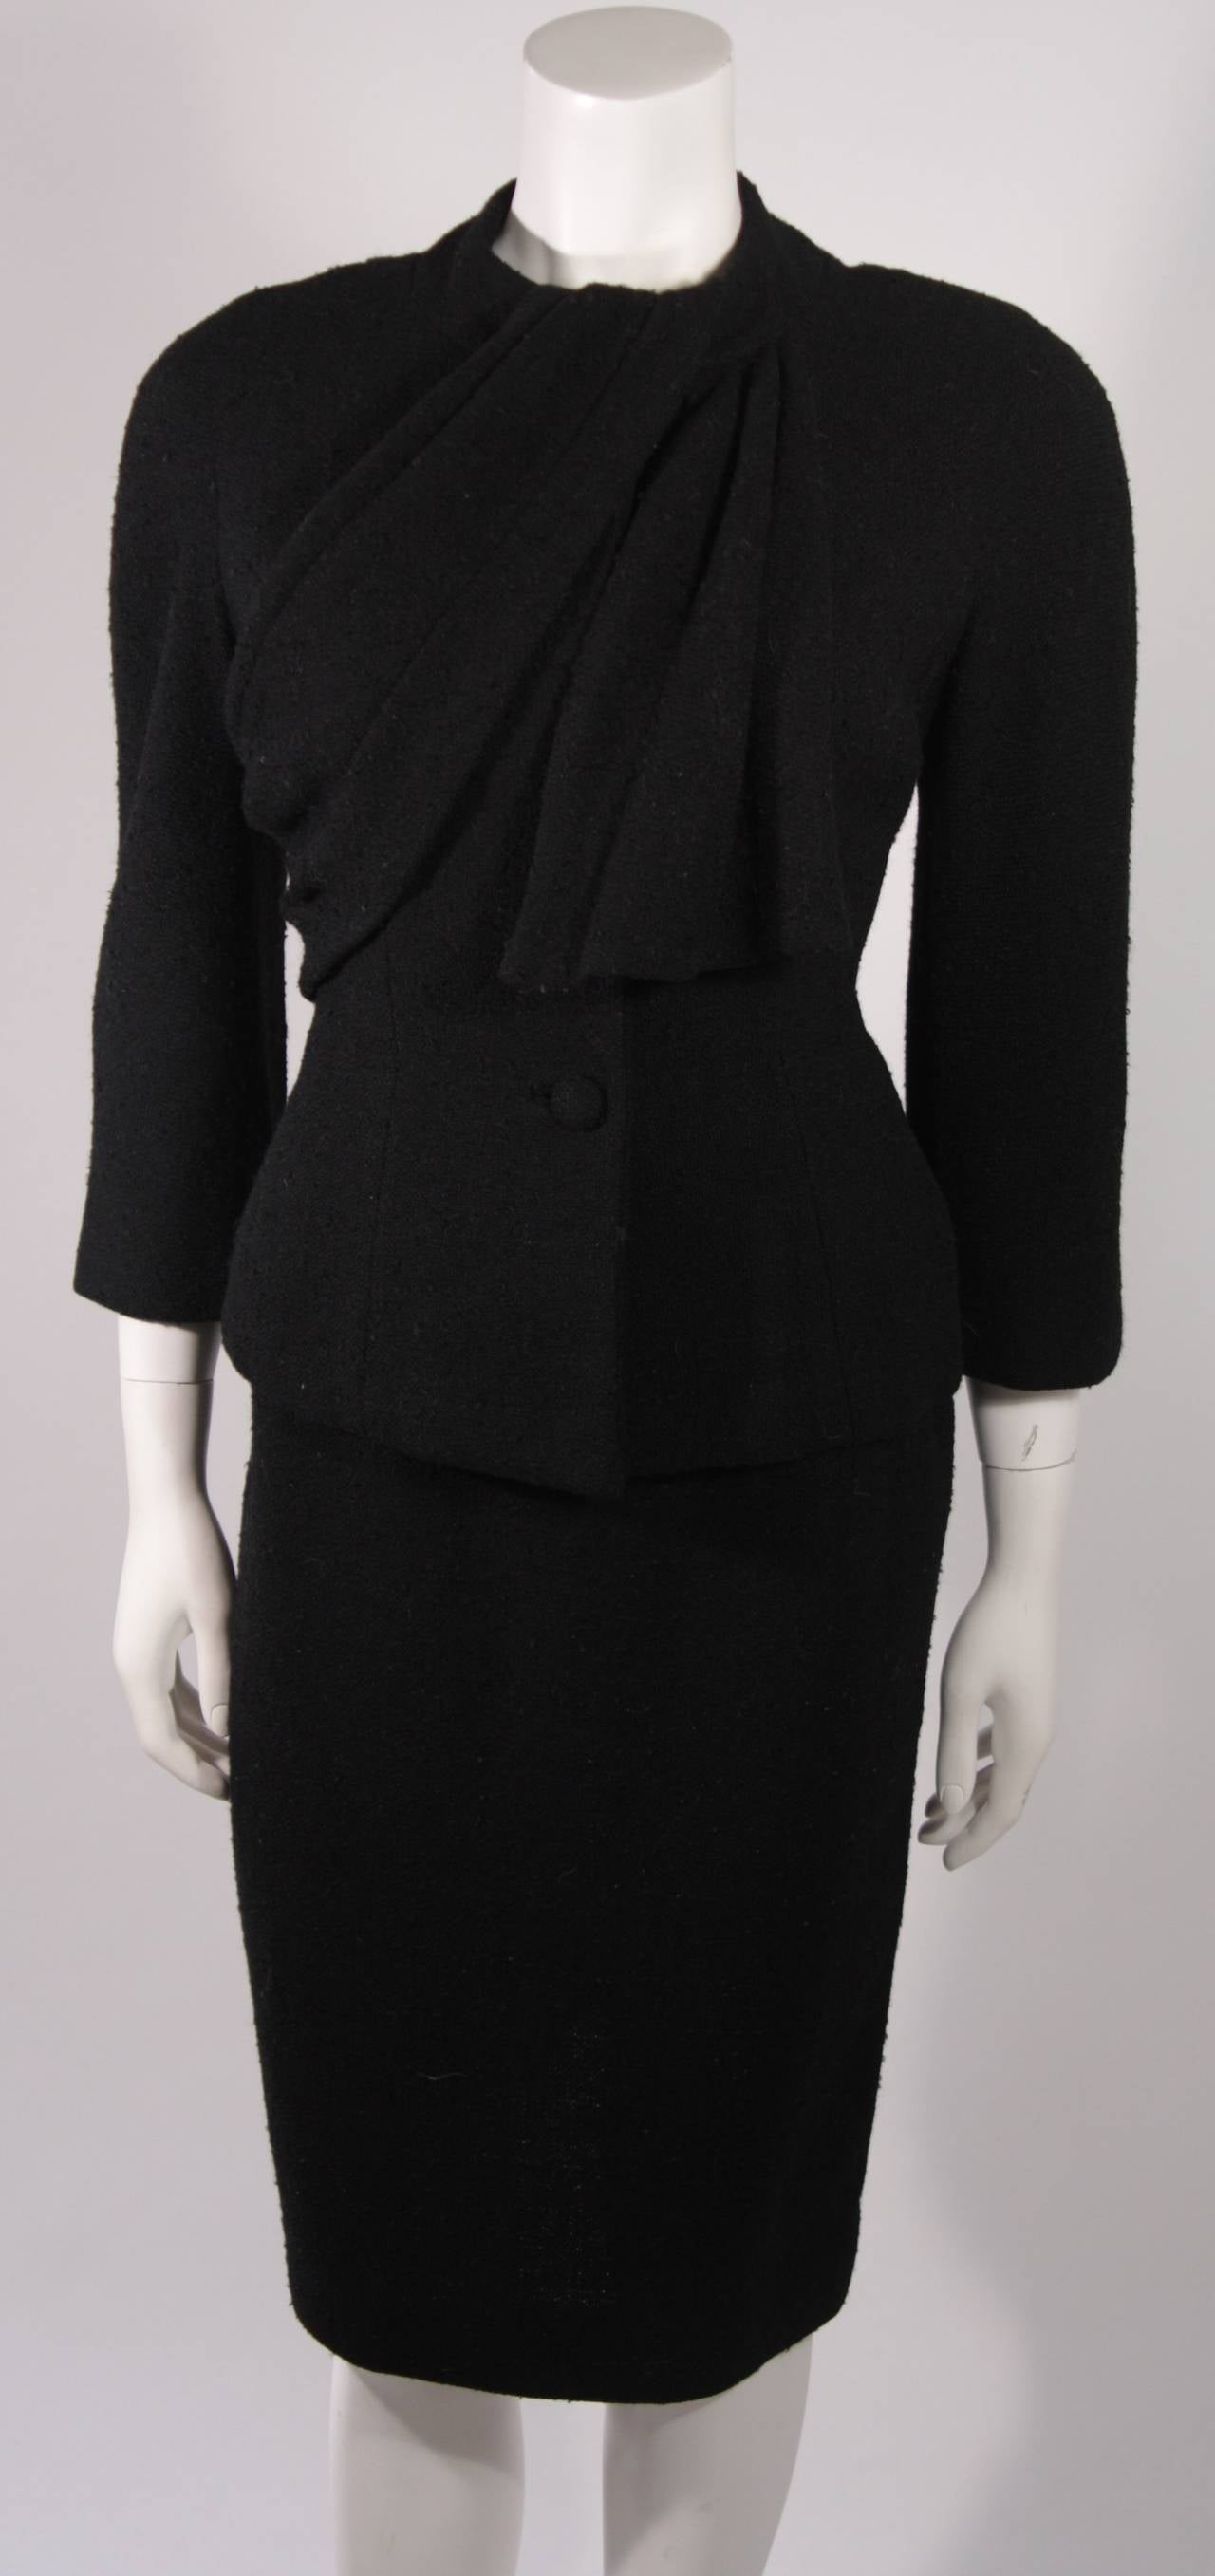 This is a Lilli Ann design. This stunning two piece suit is composed of fantastic black wool and features a brilliant draping from the neck. There are center front fastenings on the jacket and zipper closure for the skirt. 

Measures